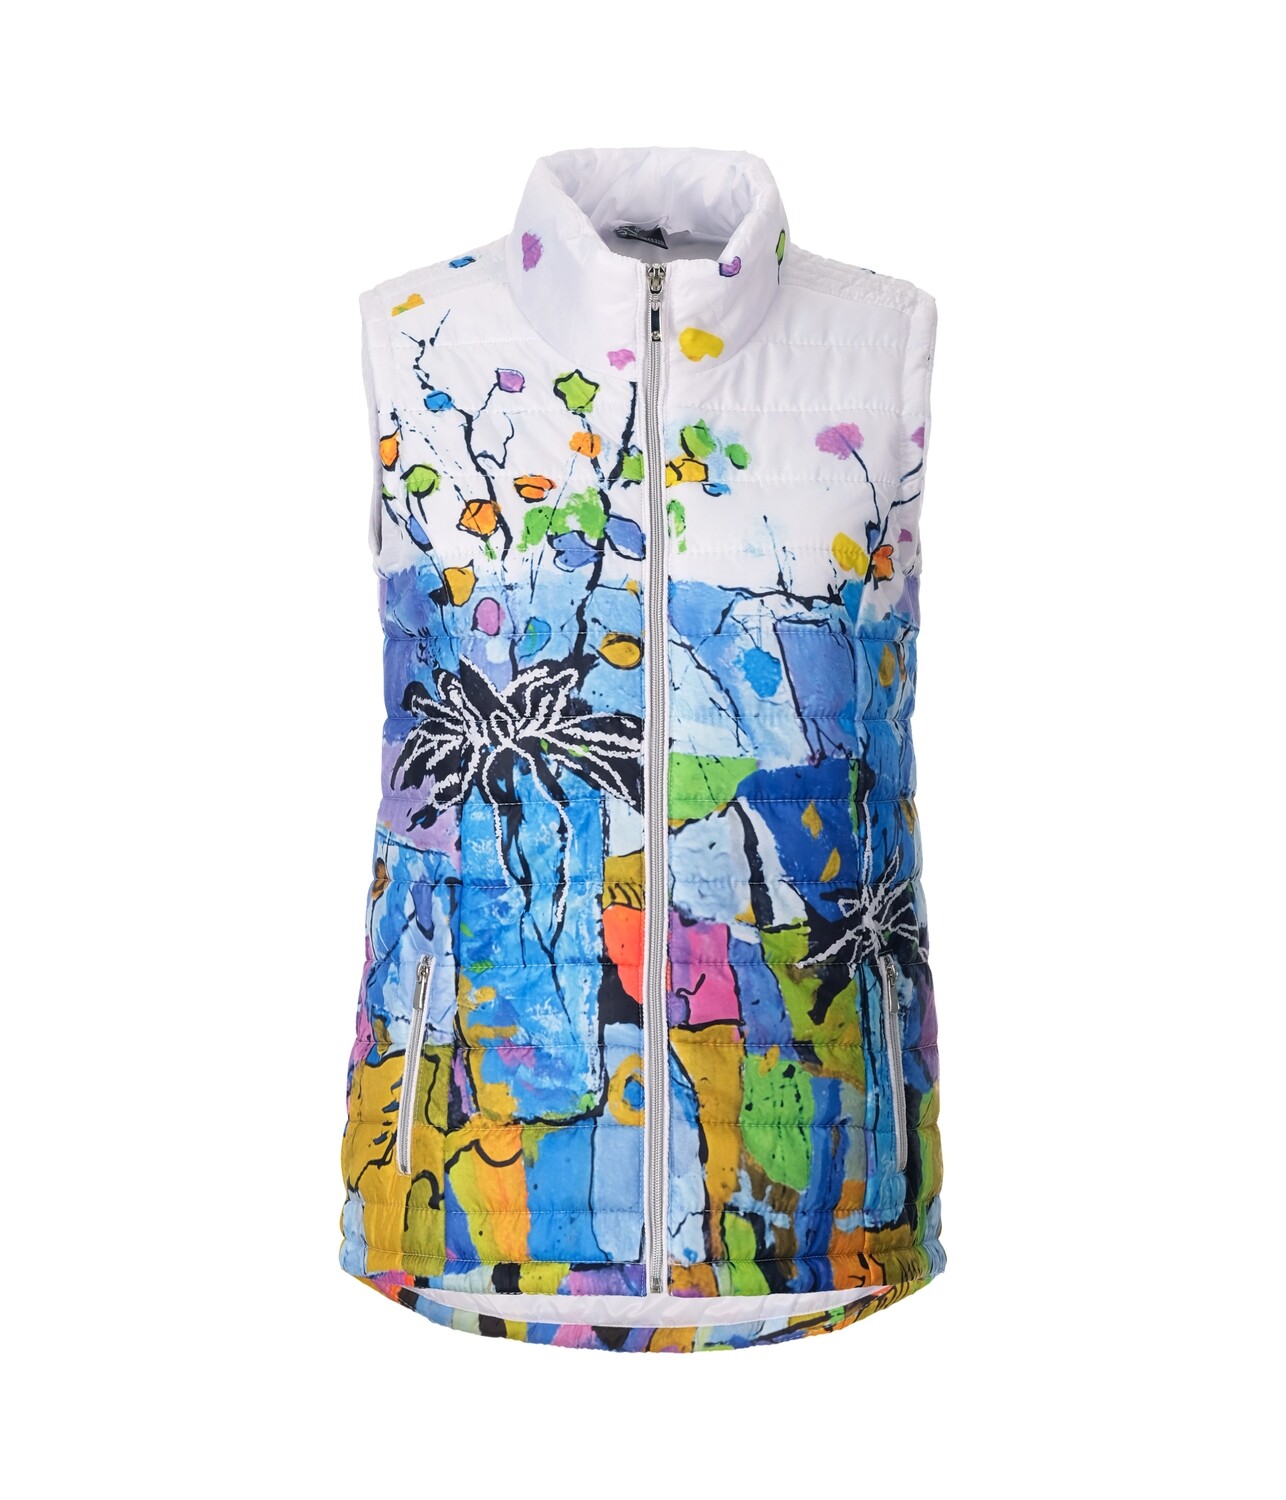 Simply Art Dolcezza: Still Life For A Wedding Party Puffer Art Vest SOLD OUT